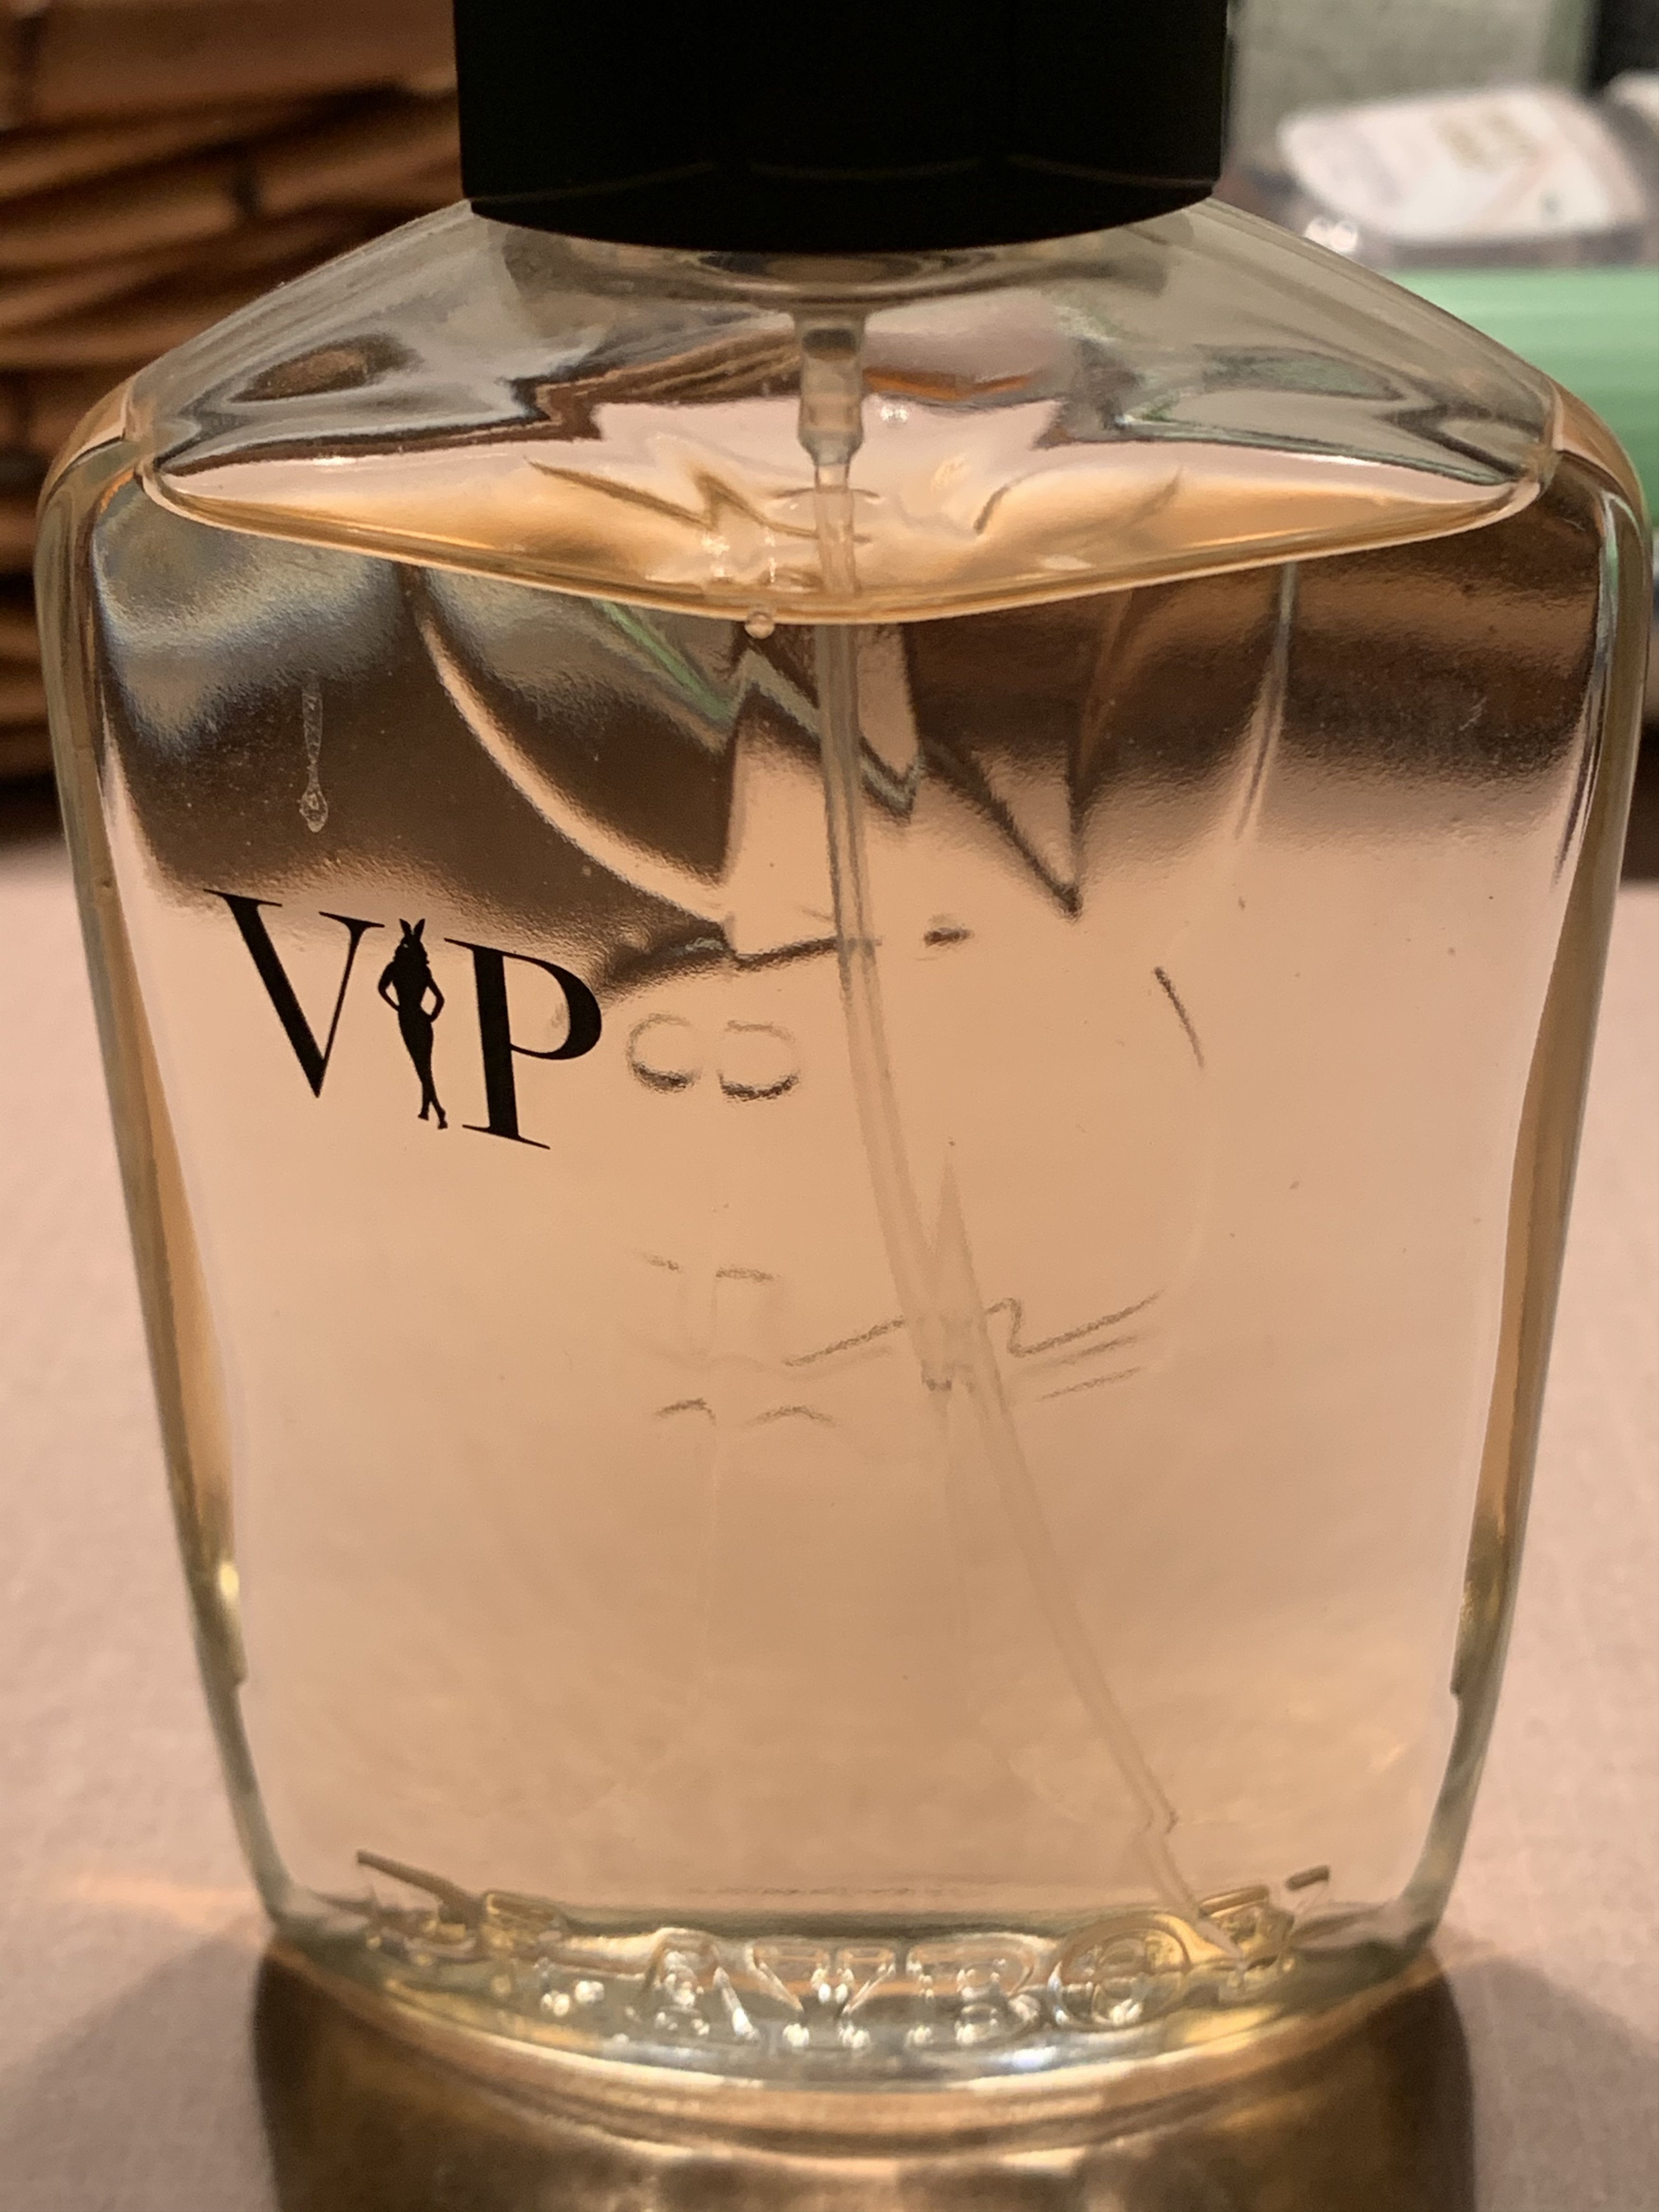 Playboy *RARE* Playboy VIP OG Cologne Perfume Size ONE SIZE - 2 Preview